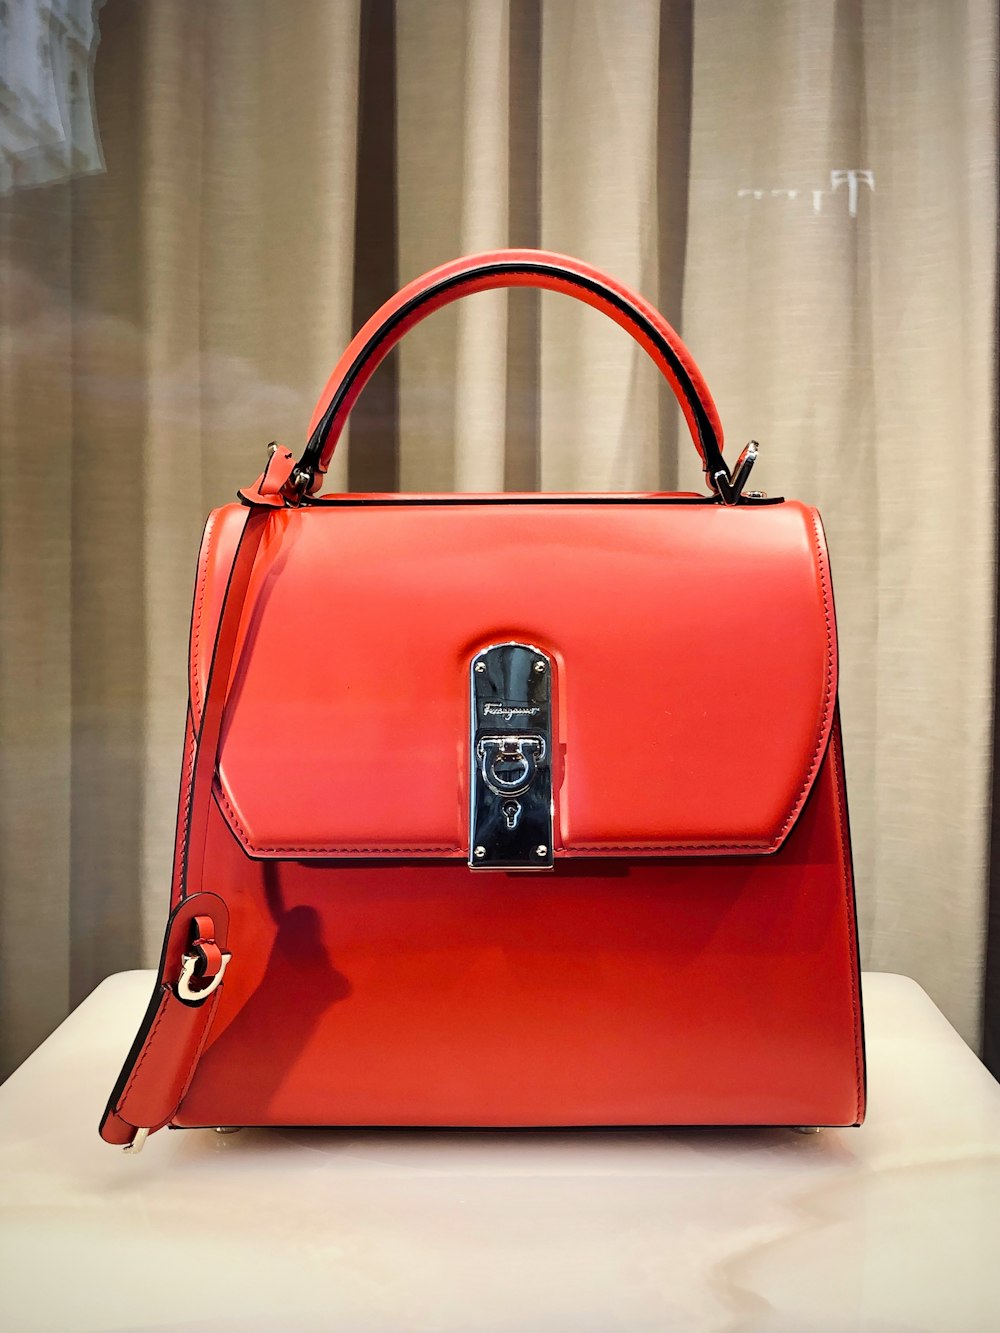 red leather handbag on white table